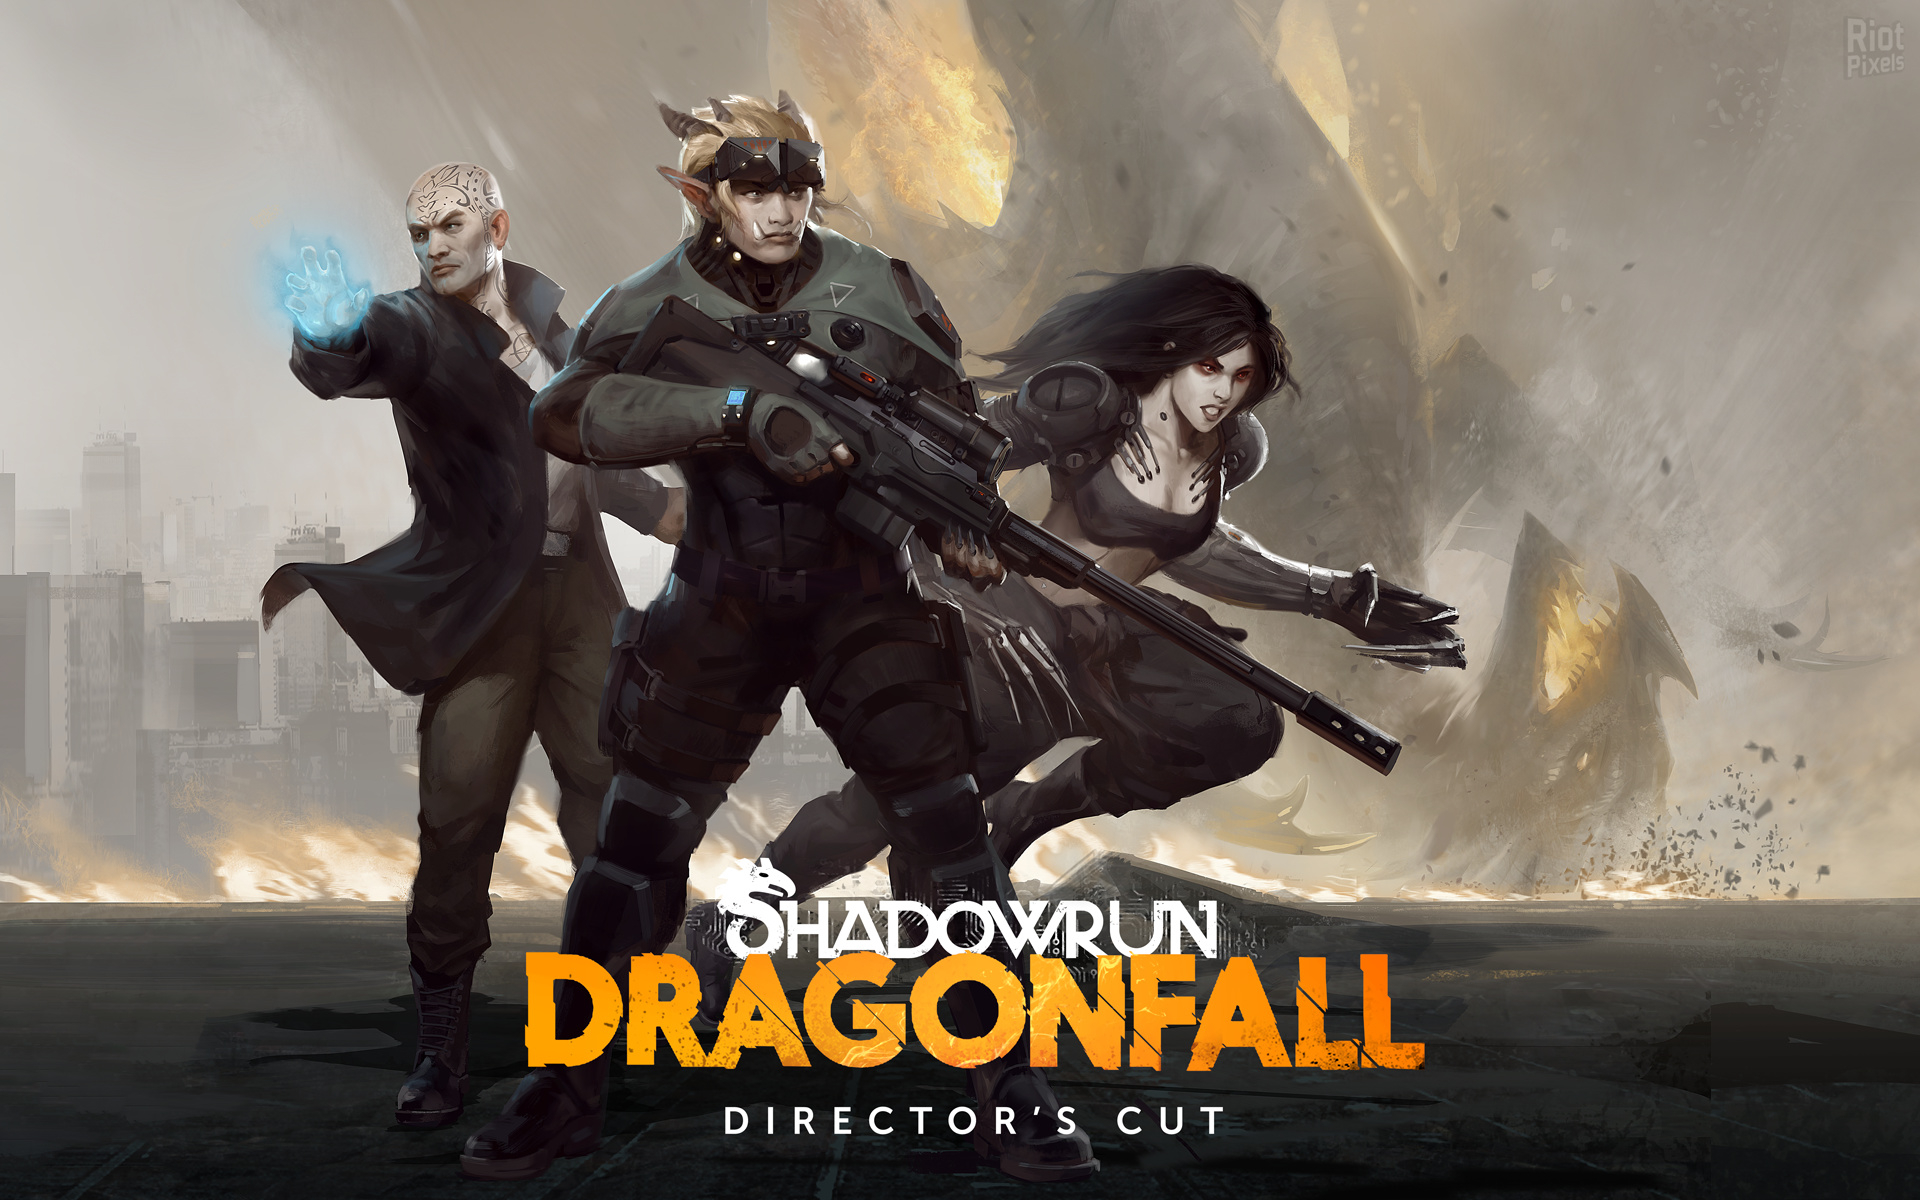 1920x1200 Shadowrun: Dragonfall Director's Cut game wallpapers at Riot Pixels, images